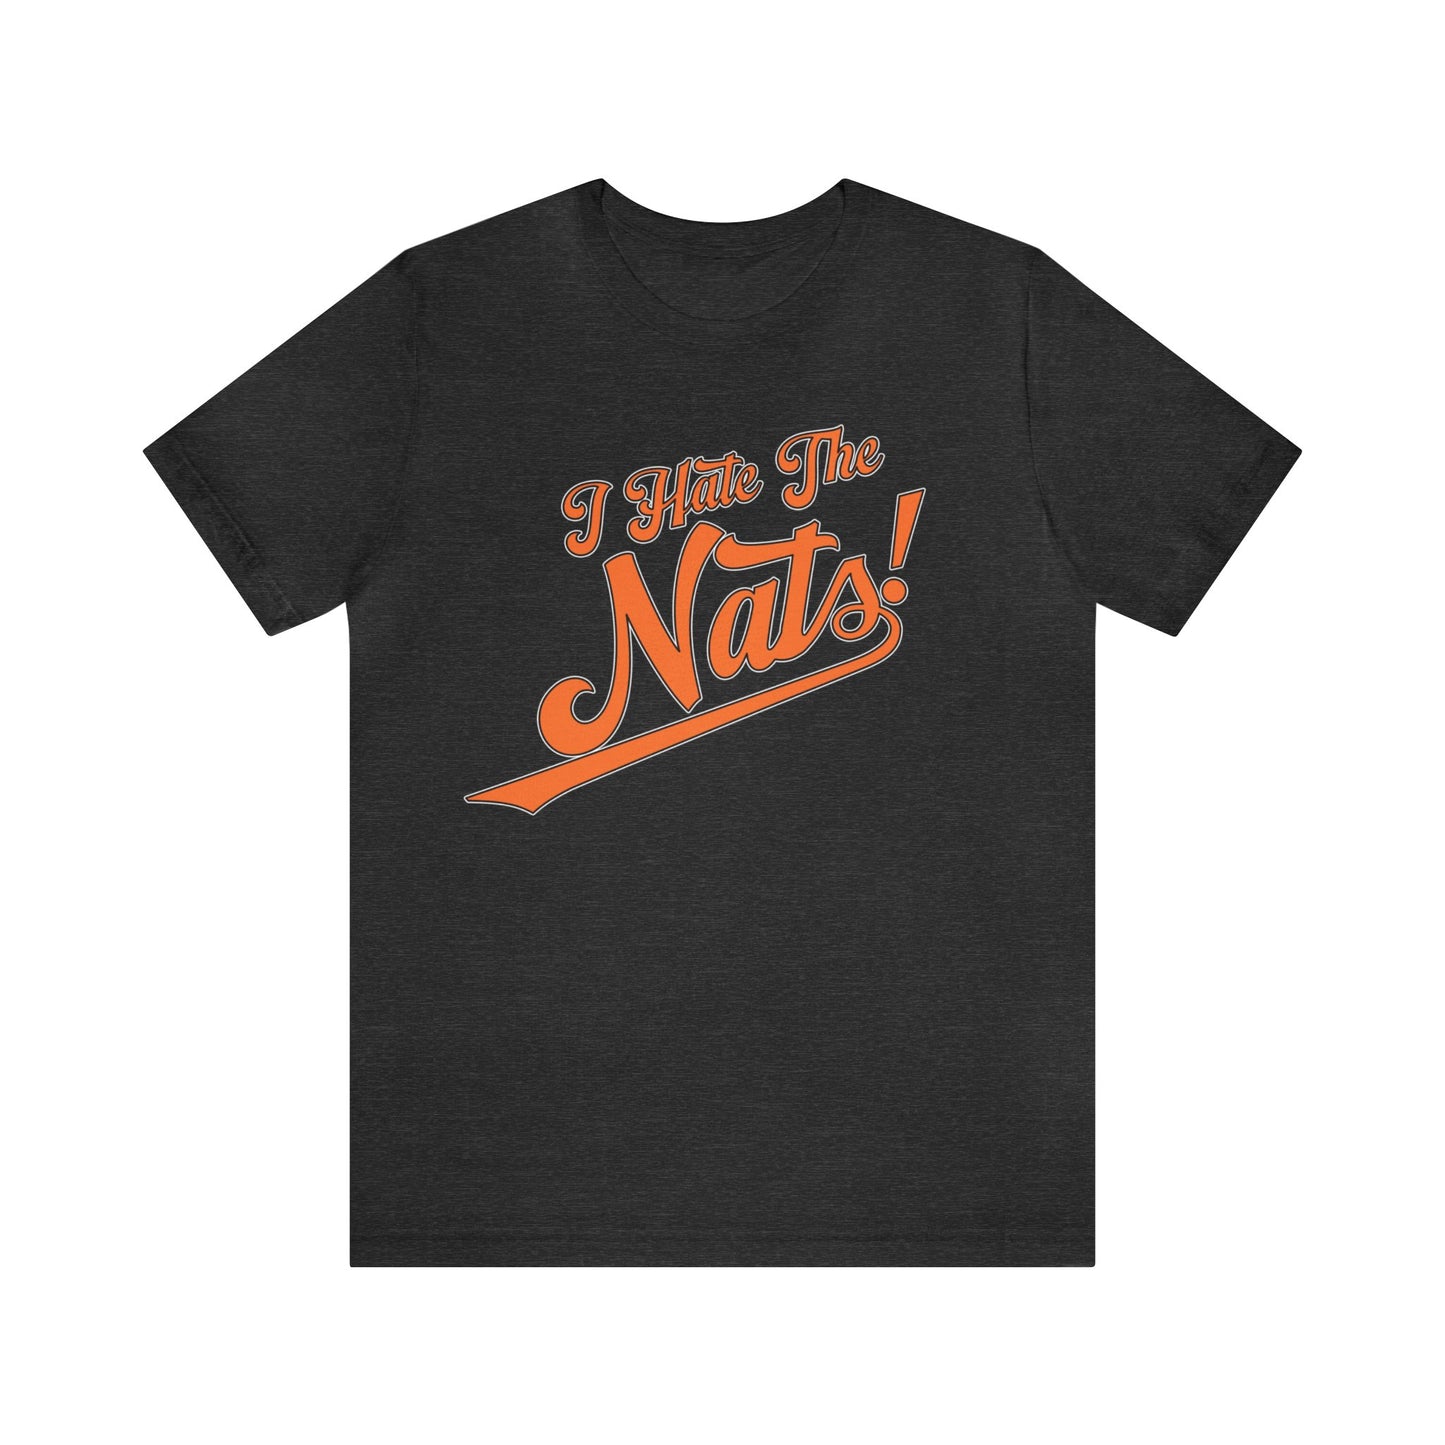 I Hate The Nats (Baltimore Fans) - Unisex Jersey Short Sleeve Tee